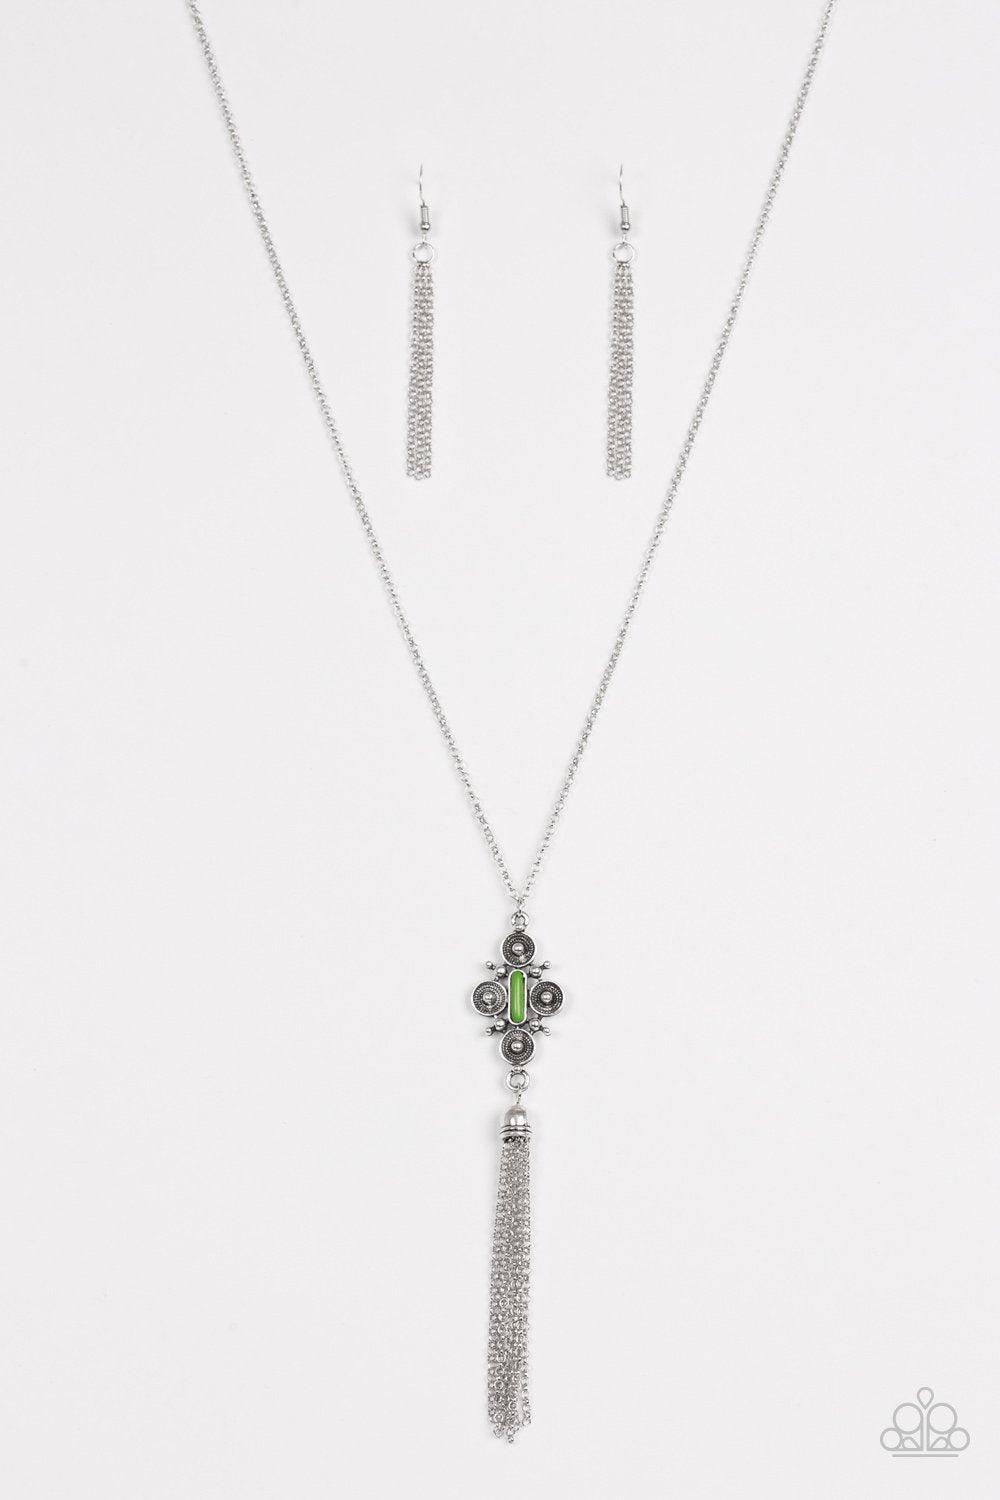 Sedona Skies Silver and Green Necklace - Paparazzi Accessories-CarasShop.com - $5 Jewelry by Cara Jewels